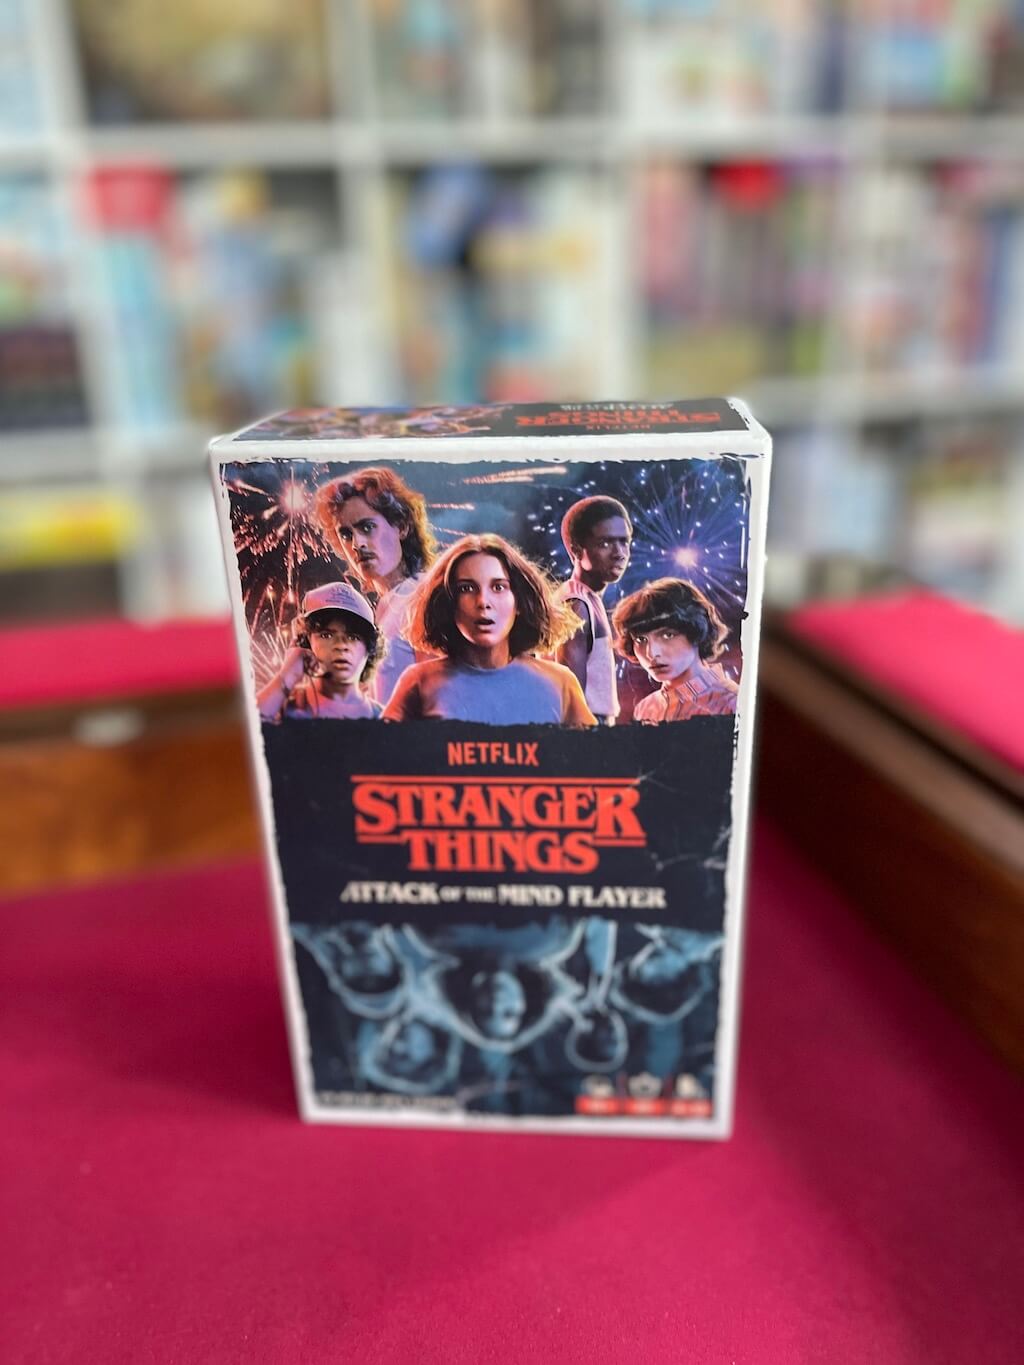 Stranger Things Attack of the mind flayer